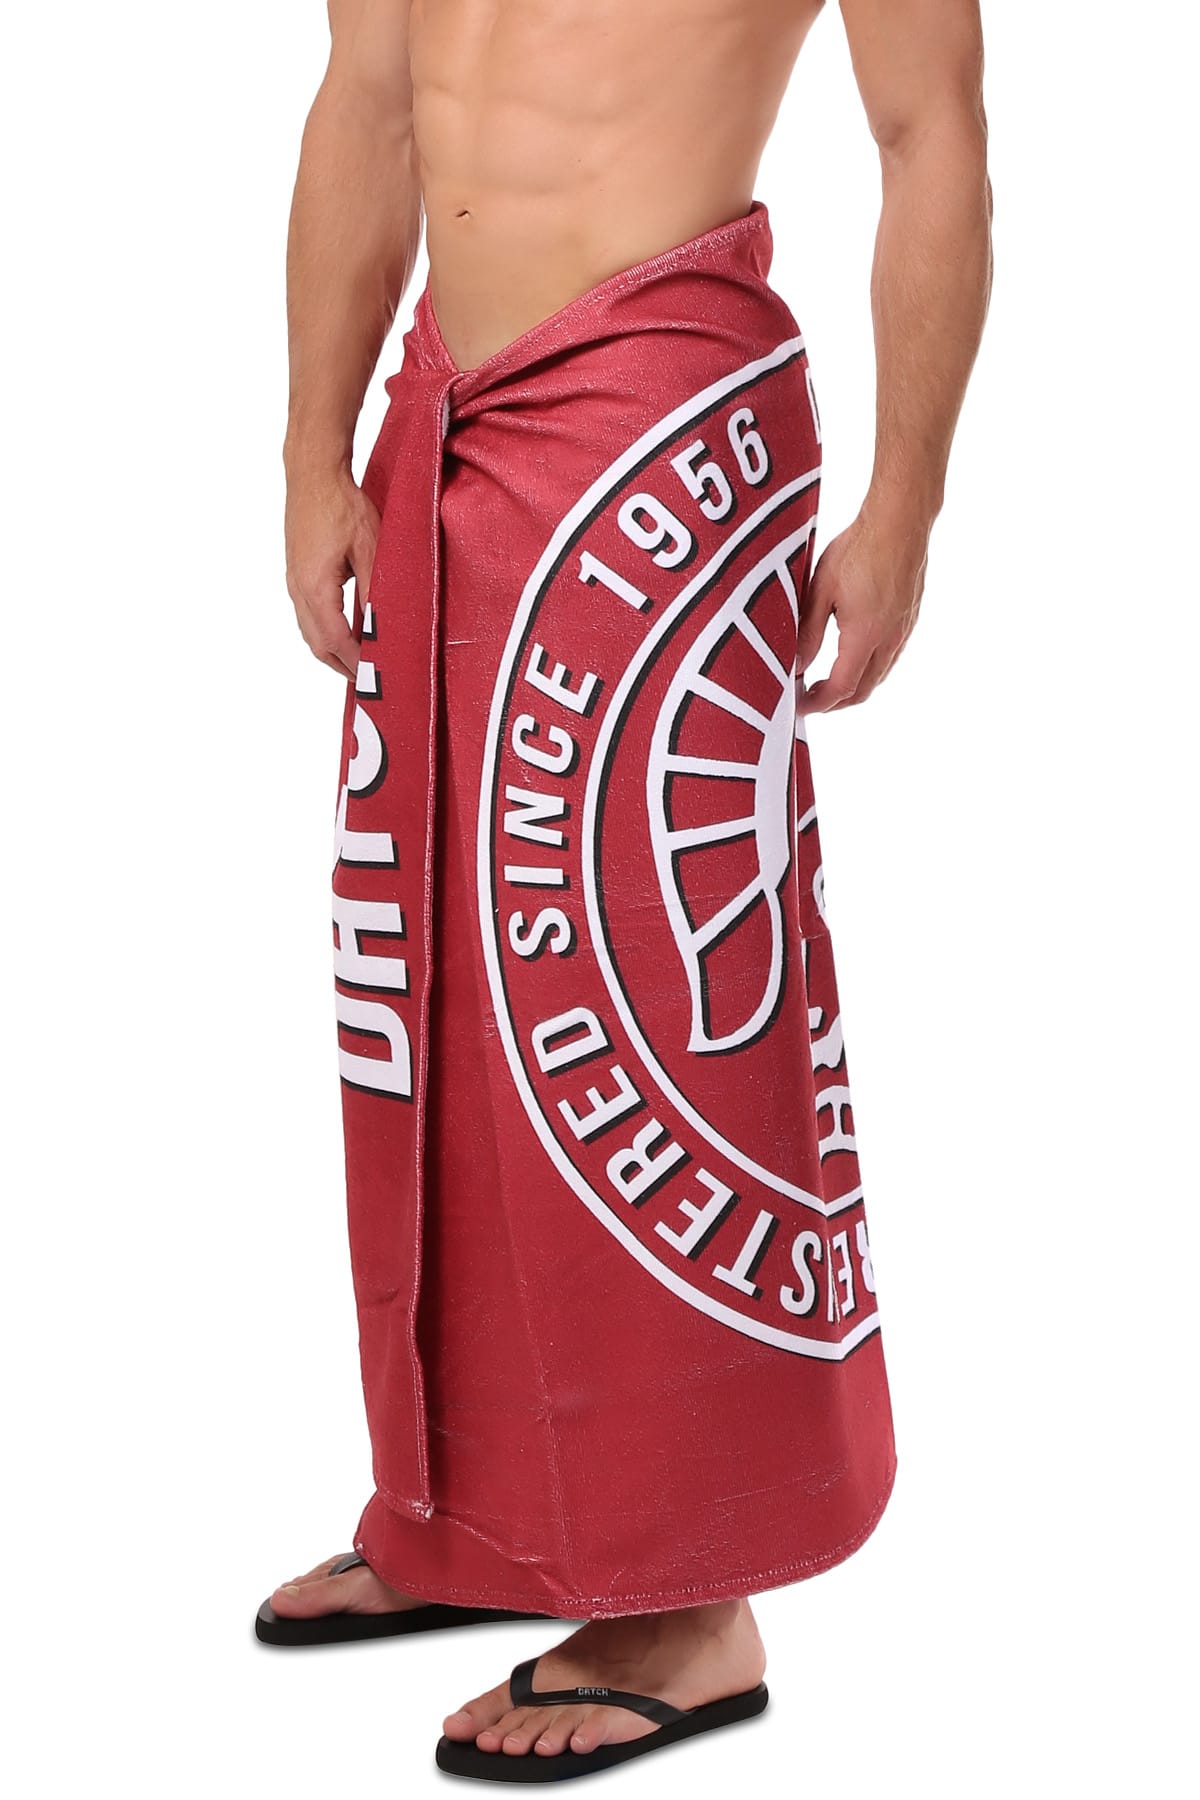 Datch Red Beach Towel